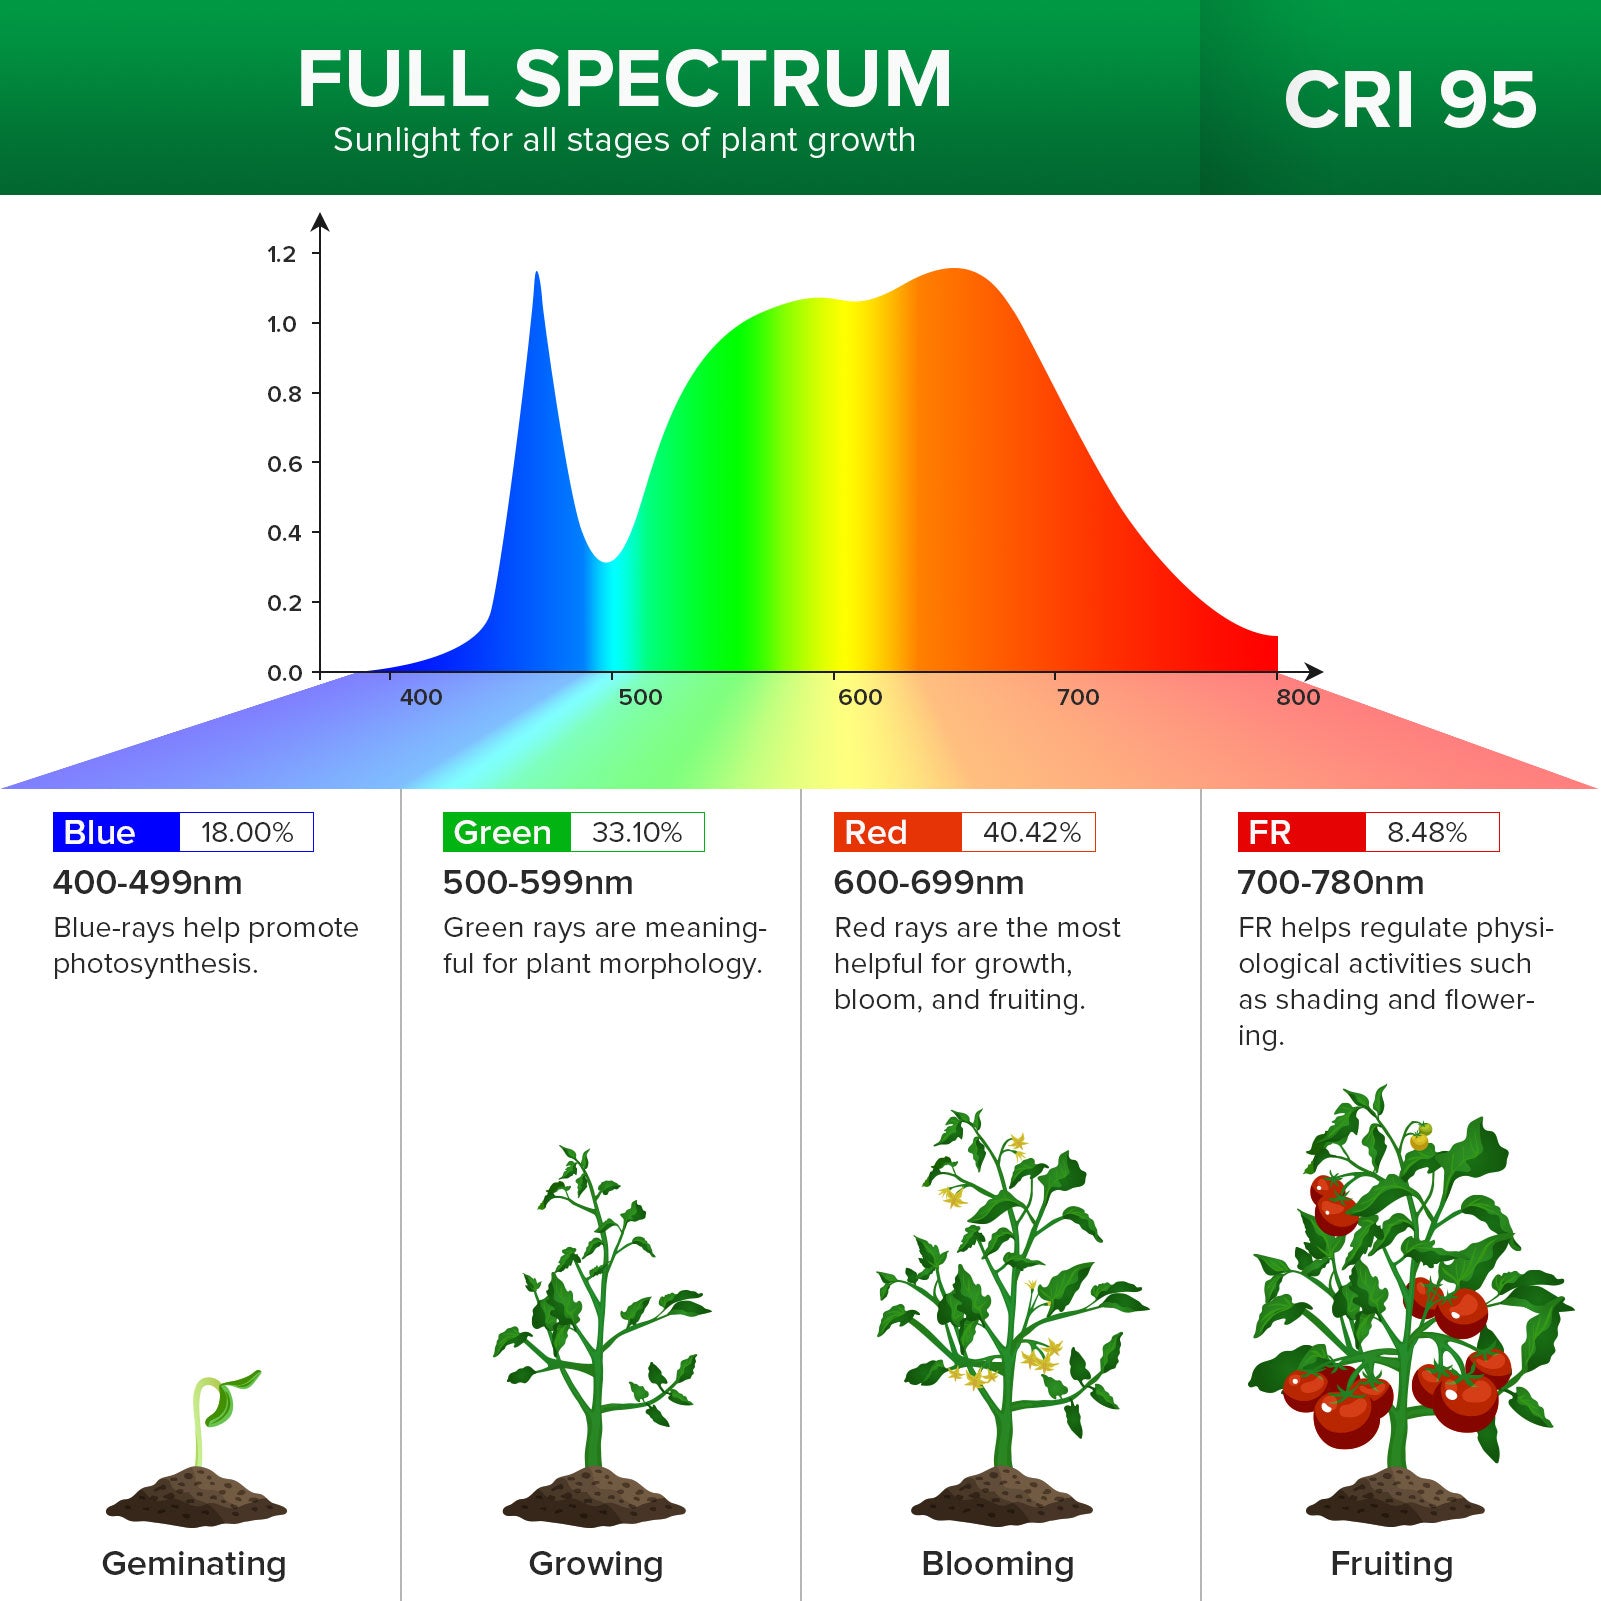 40W Adjustable 4-Head Clip-on LED Grow Light (US ONLY) is full spectrum，sunlight for all stages of plant growth，CRI 95.